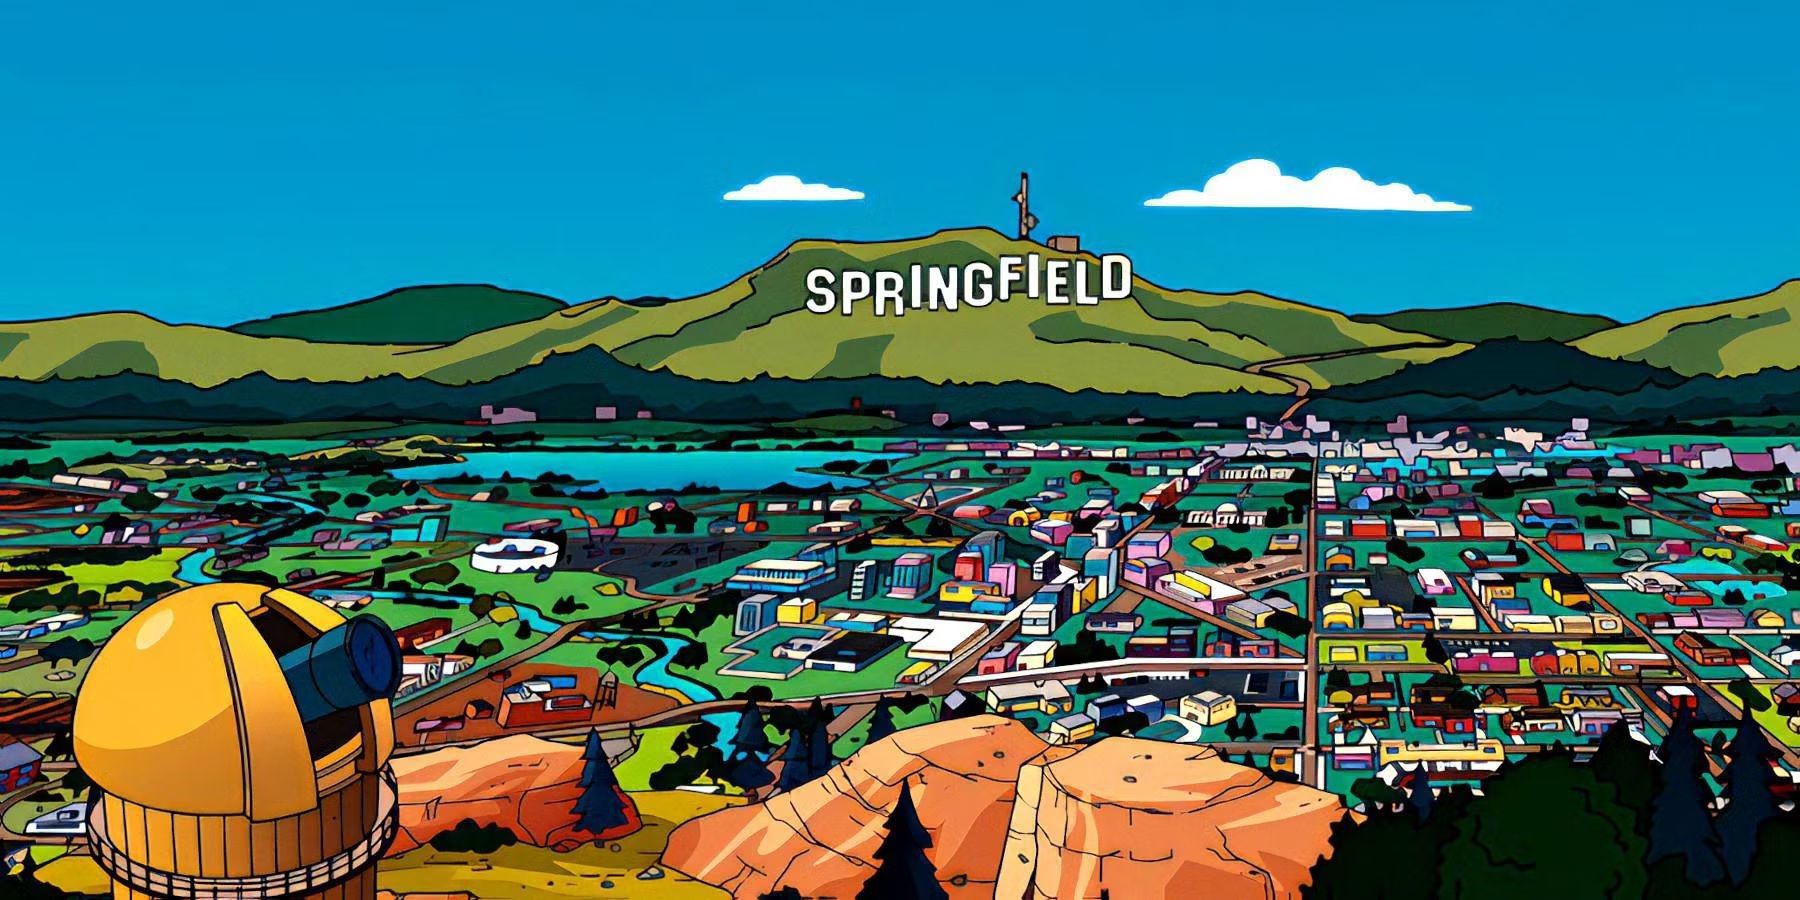 The_Springfield_skyline_in_The_Simpsons